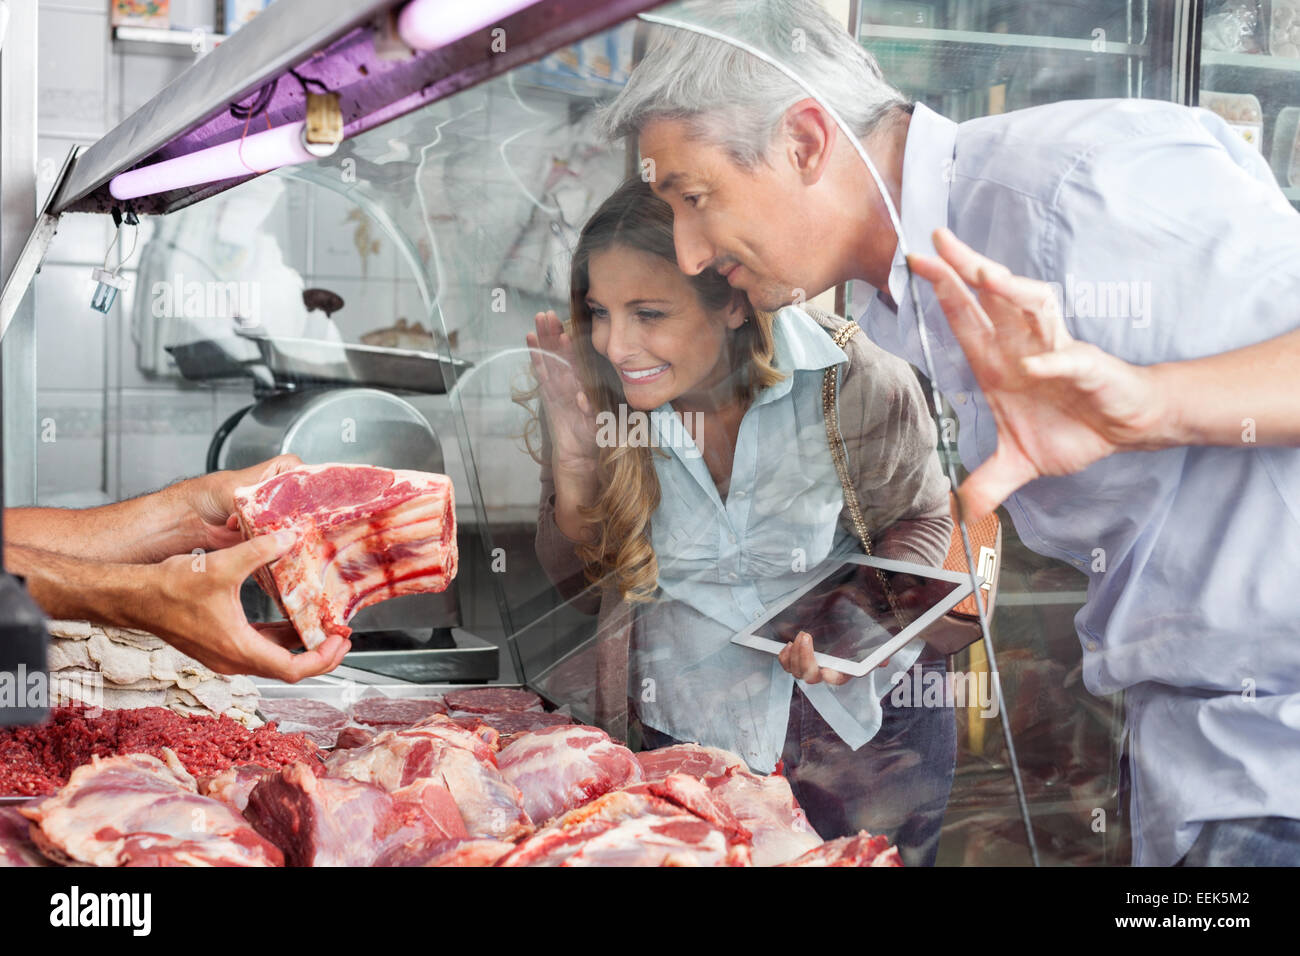 Couple Buying Meat At Butchery Stock Photo